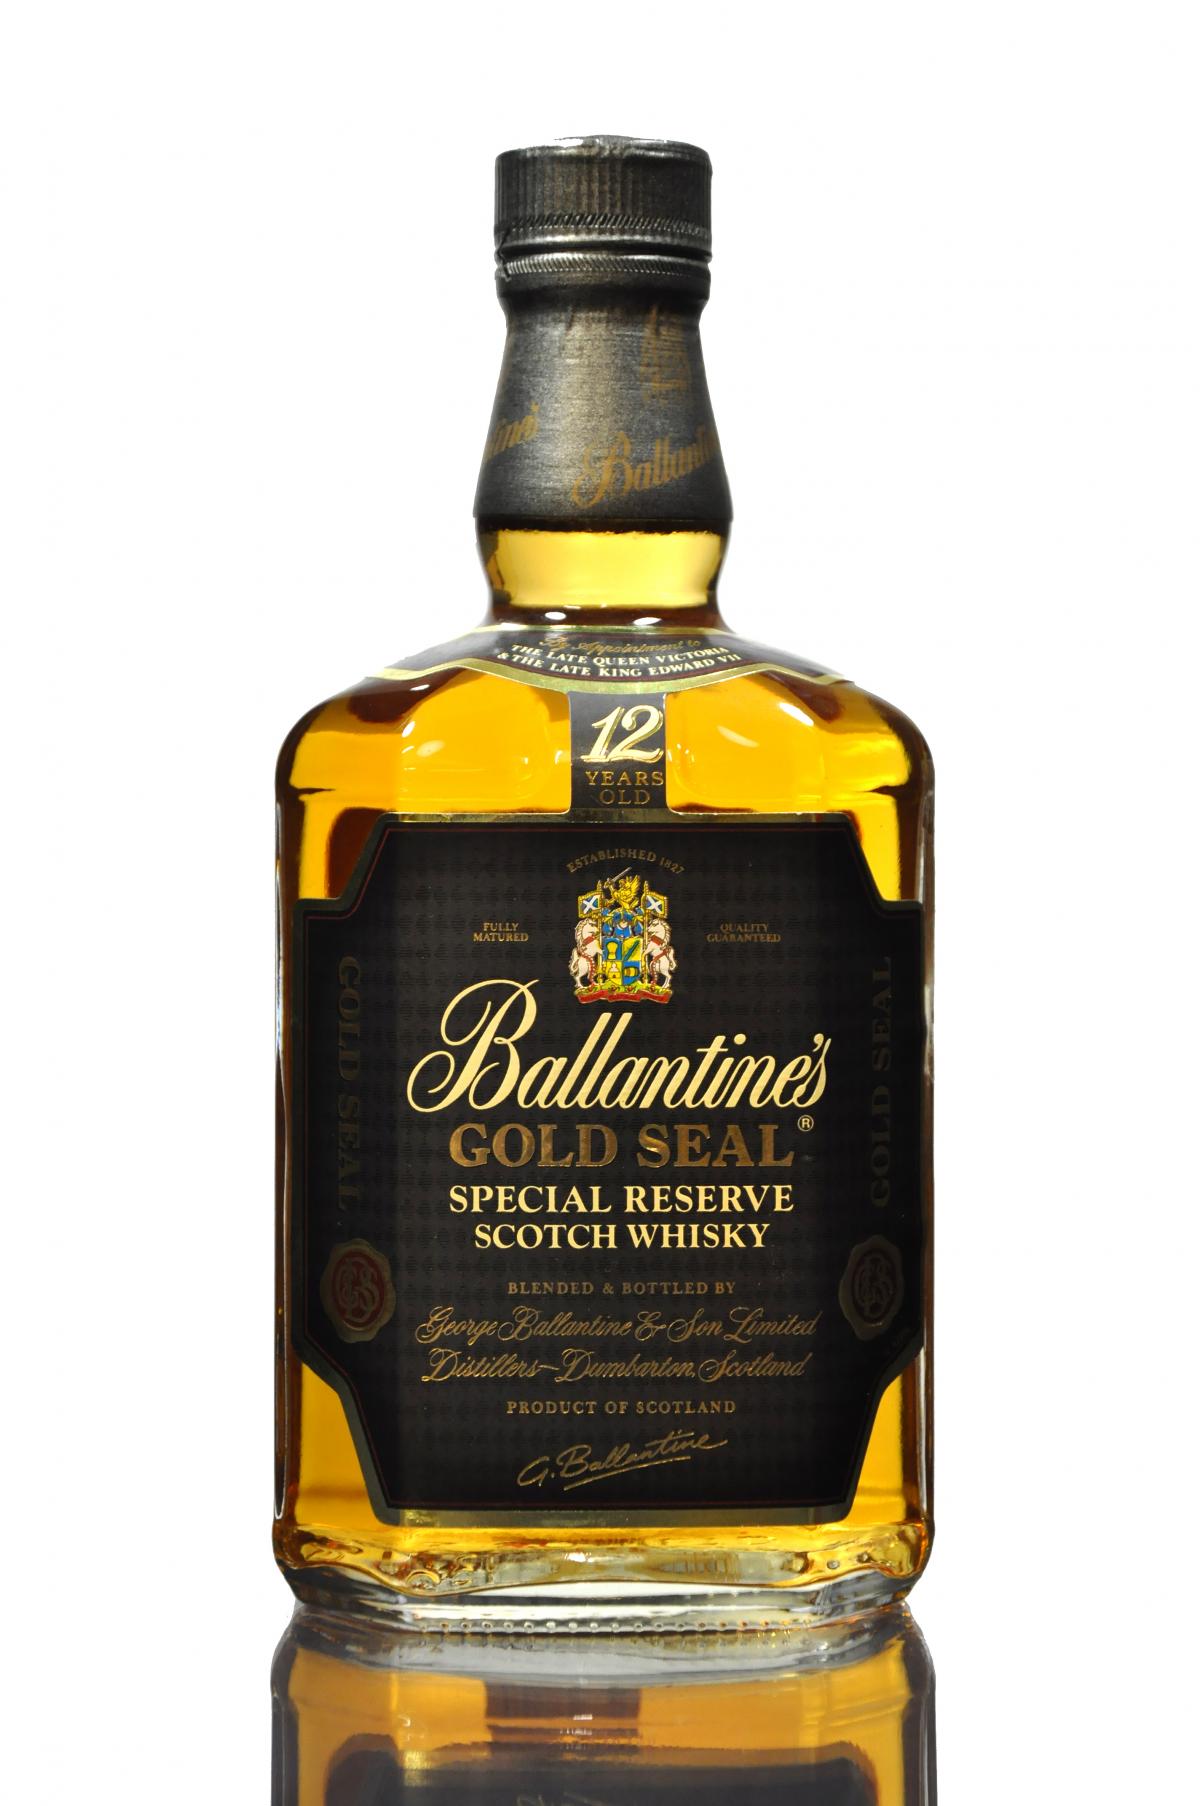 Ballantines 12 Year Old - Gold Seal